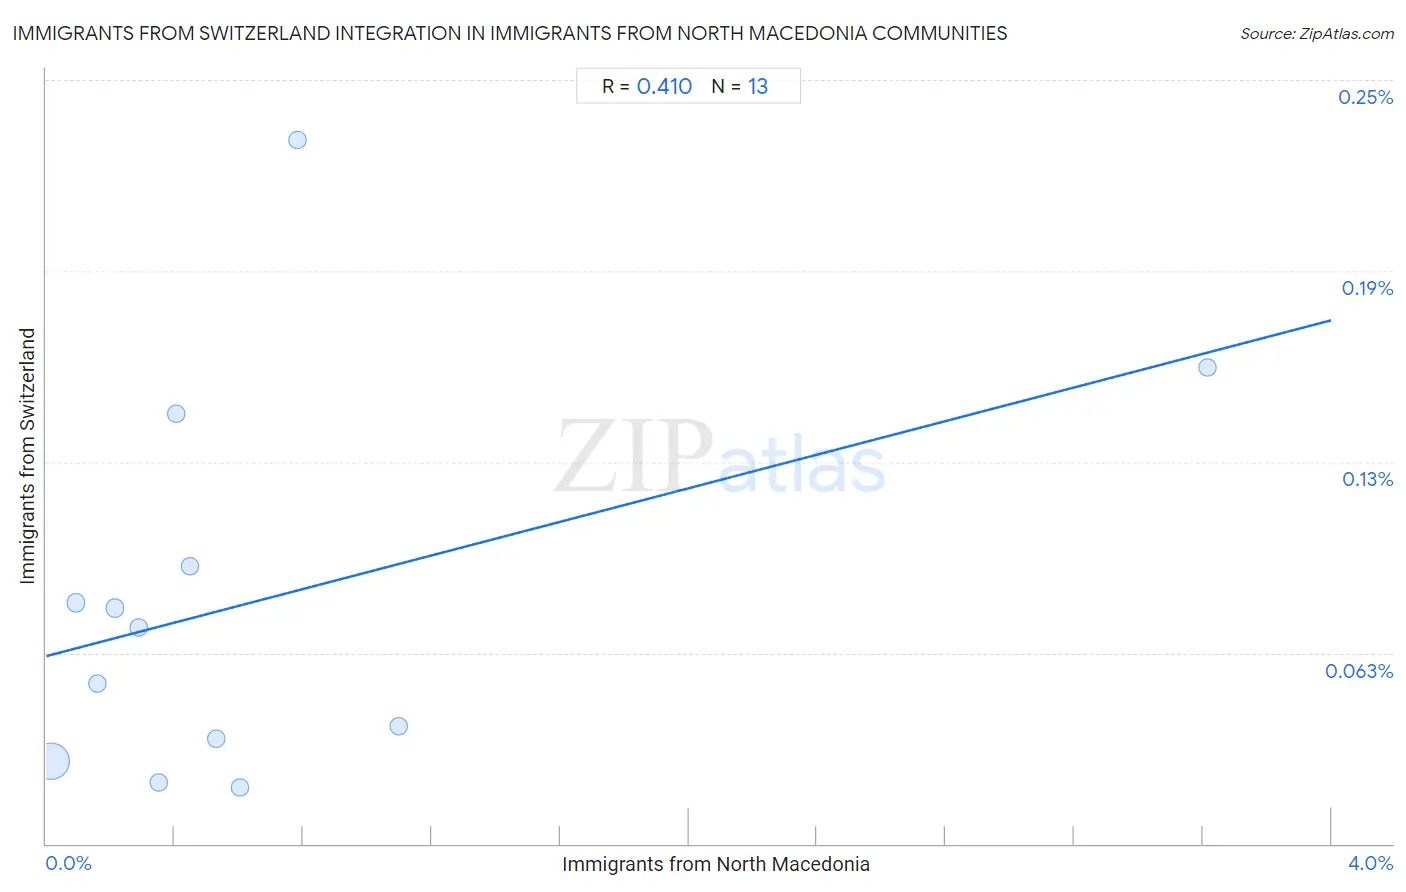 Immigrants from North Macedonia Integration in Immigrants from Switzerland Communities